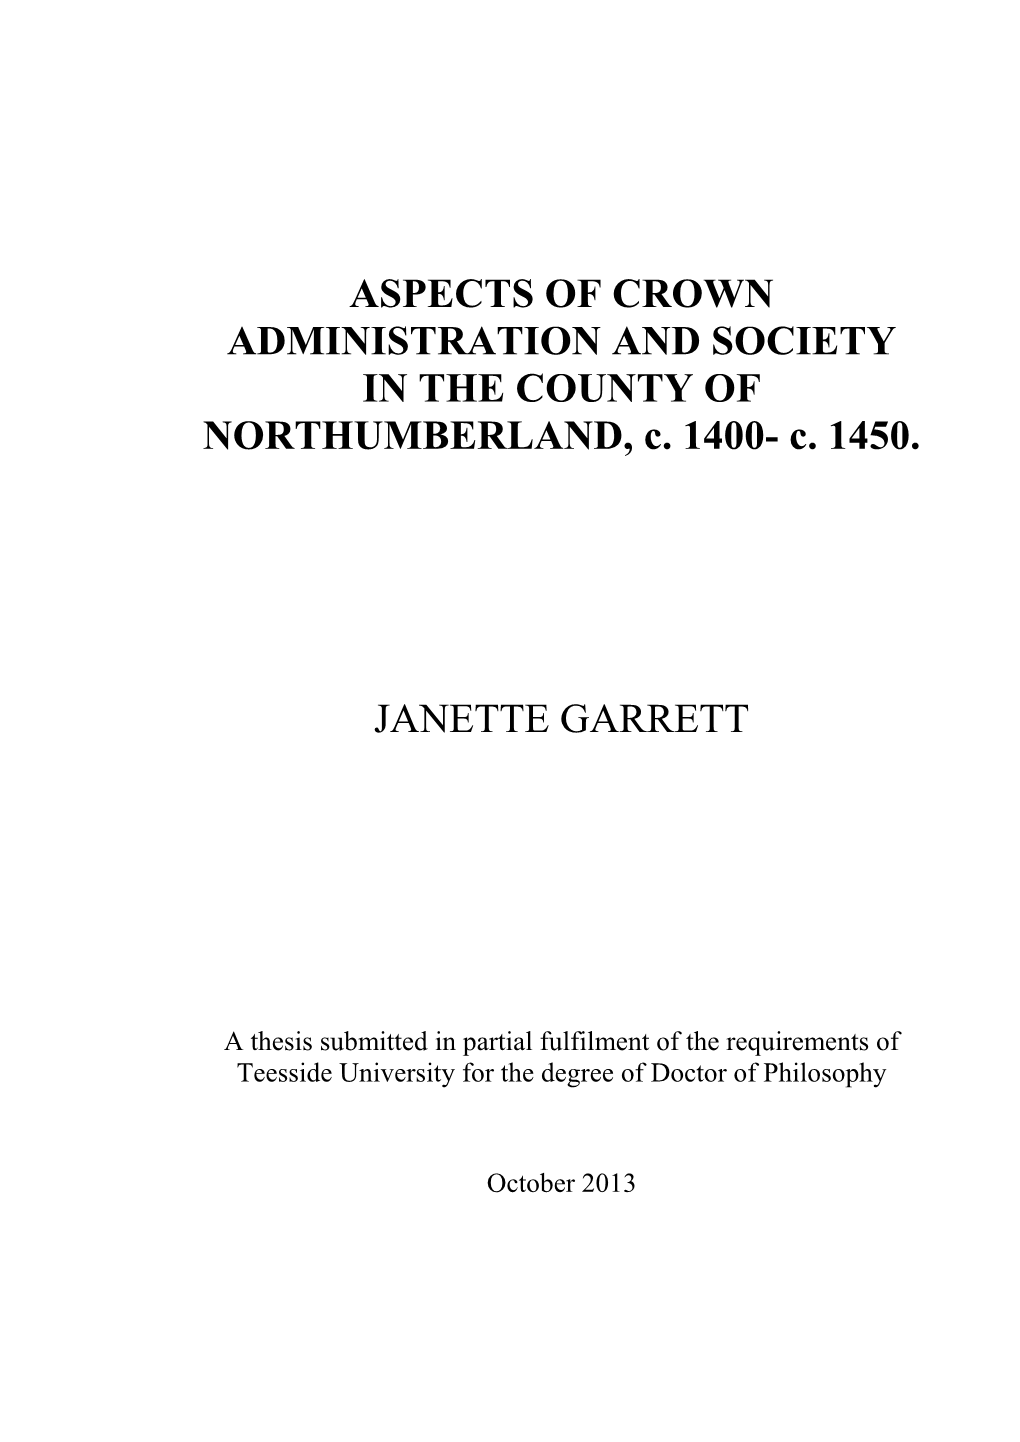 ASPECTS of CROWN ADMINISTRATION and SOCIETY in the COUNTY of NORTHUMBERLAND, C